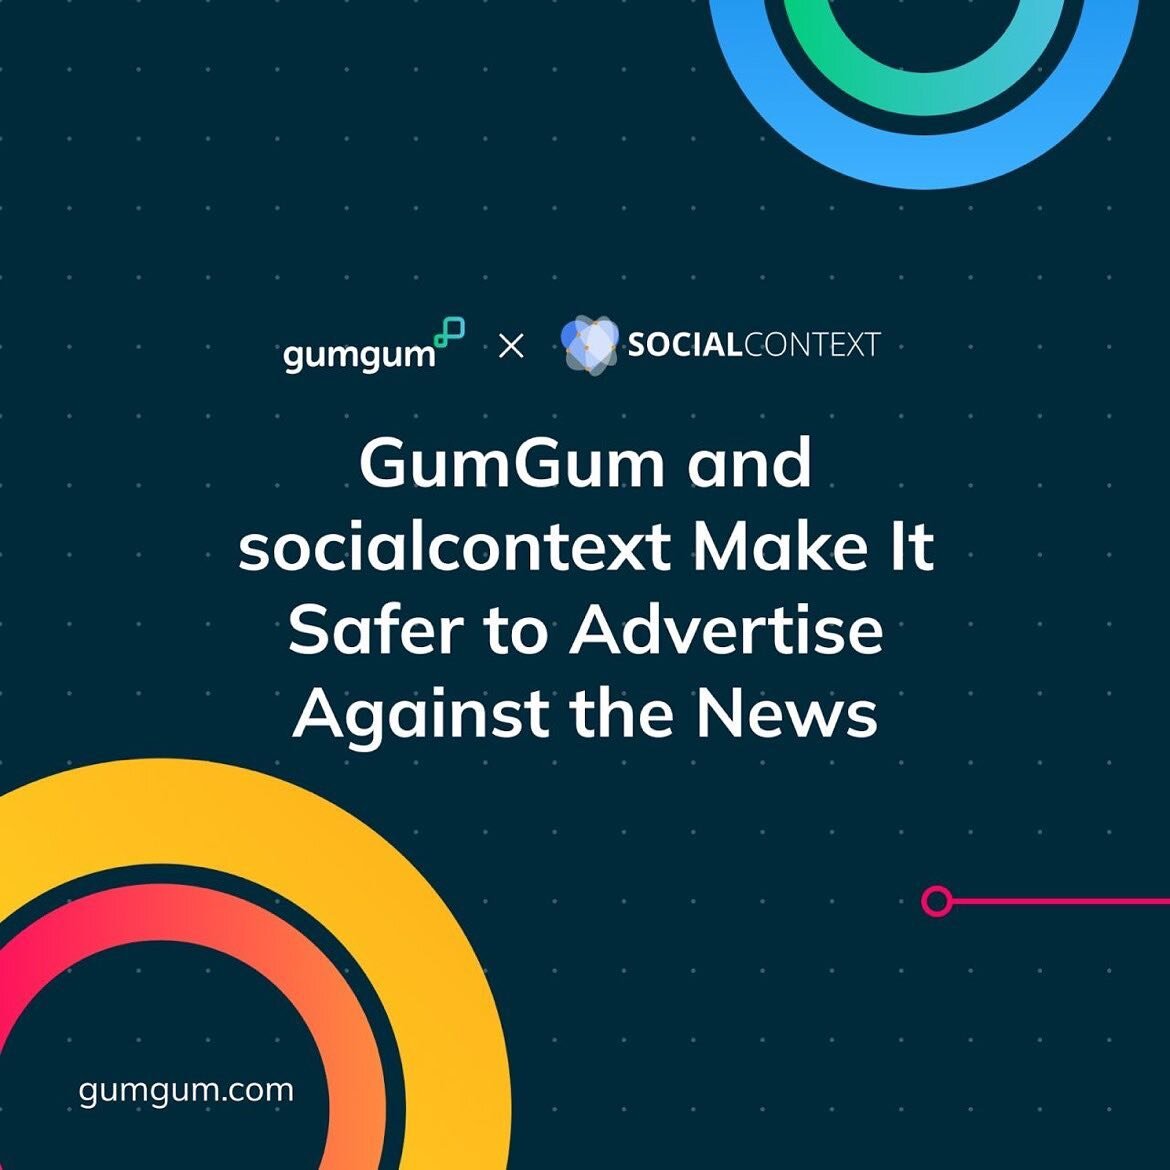 🚫 Content categorization is broken, and we're working with Socialcontext.ai to make it easier than ever for socially conscious brands and agencies to push forward positive change. 

Reach out to learn more about this powerful solution and how we can